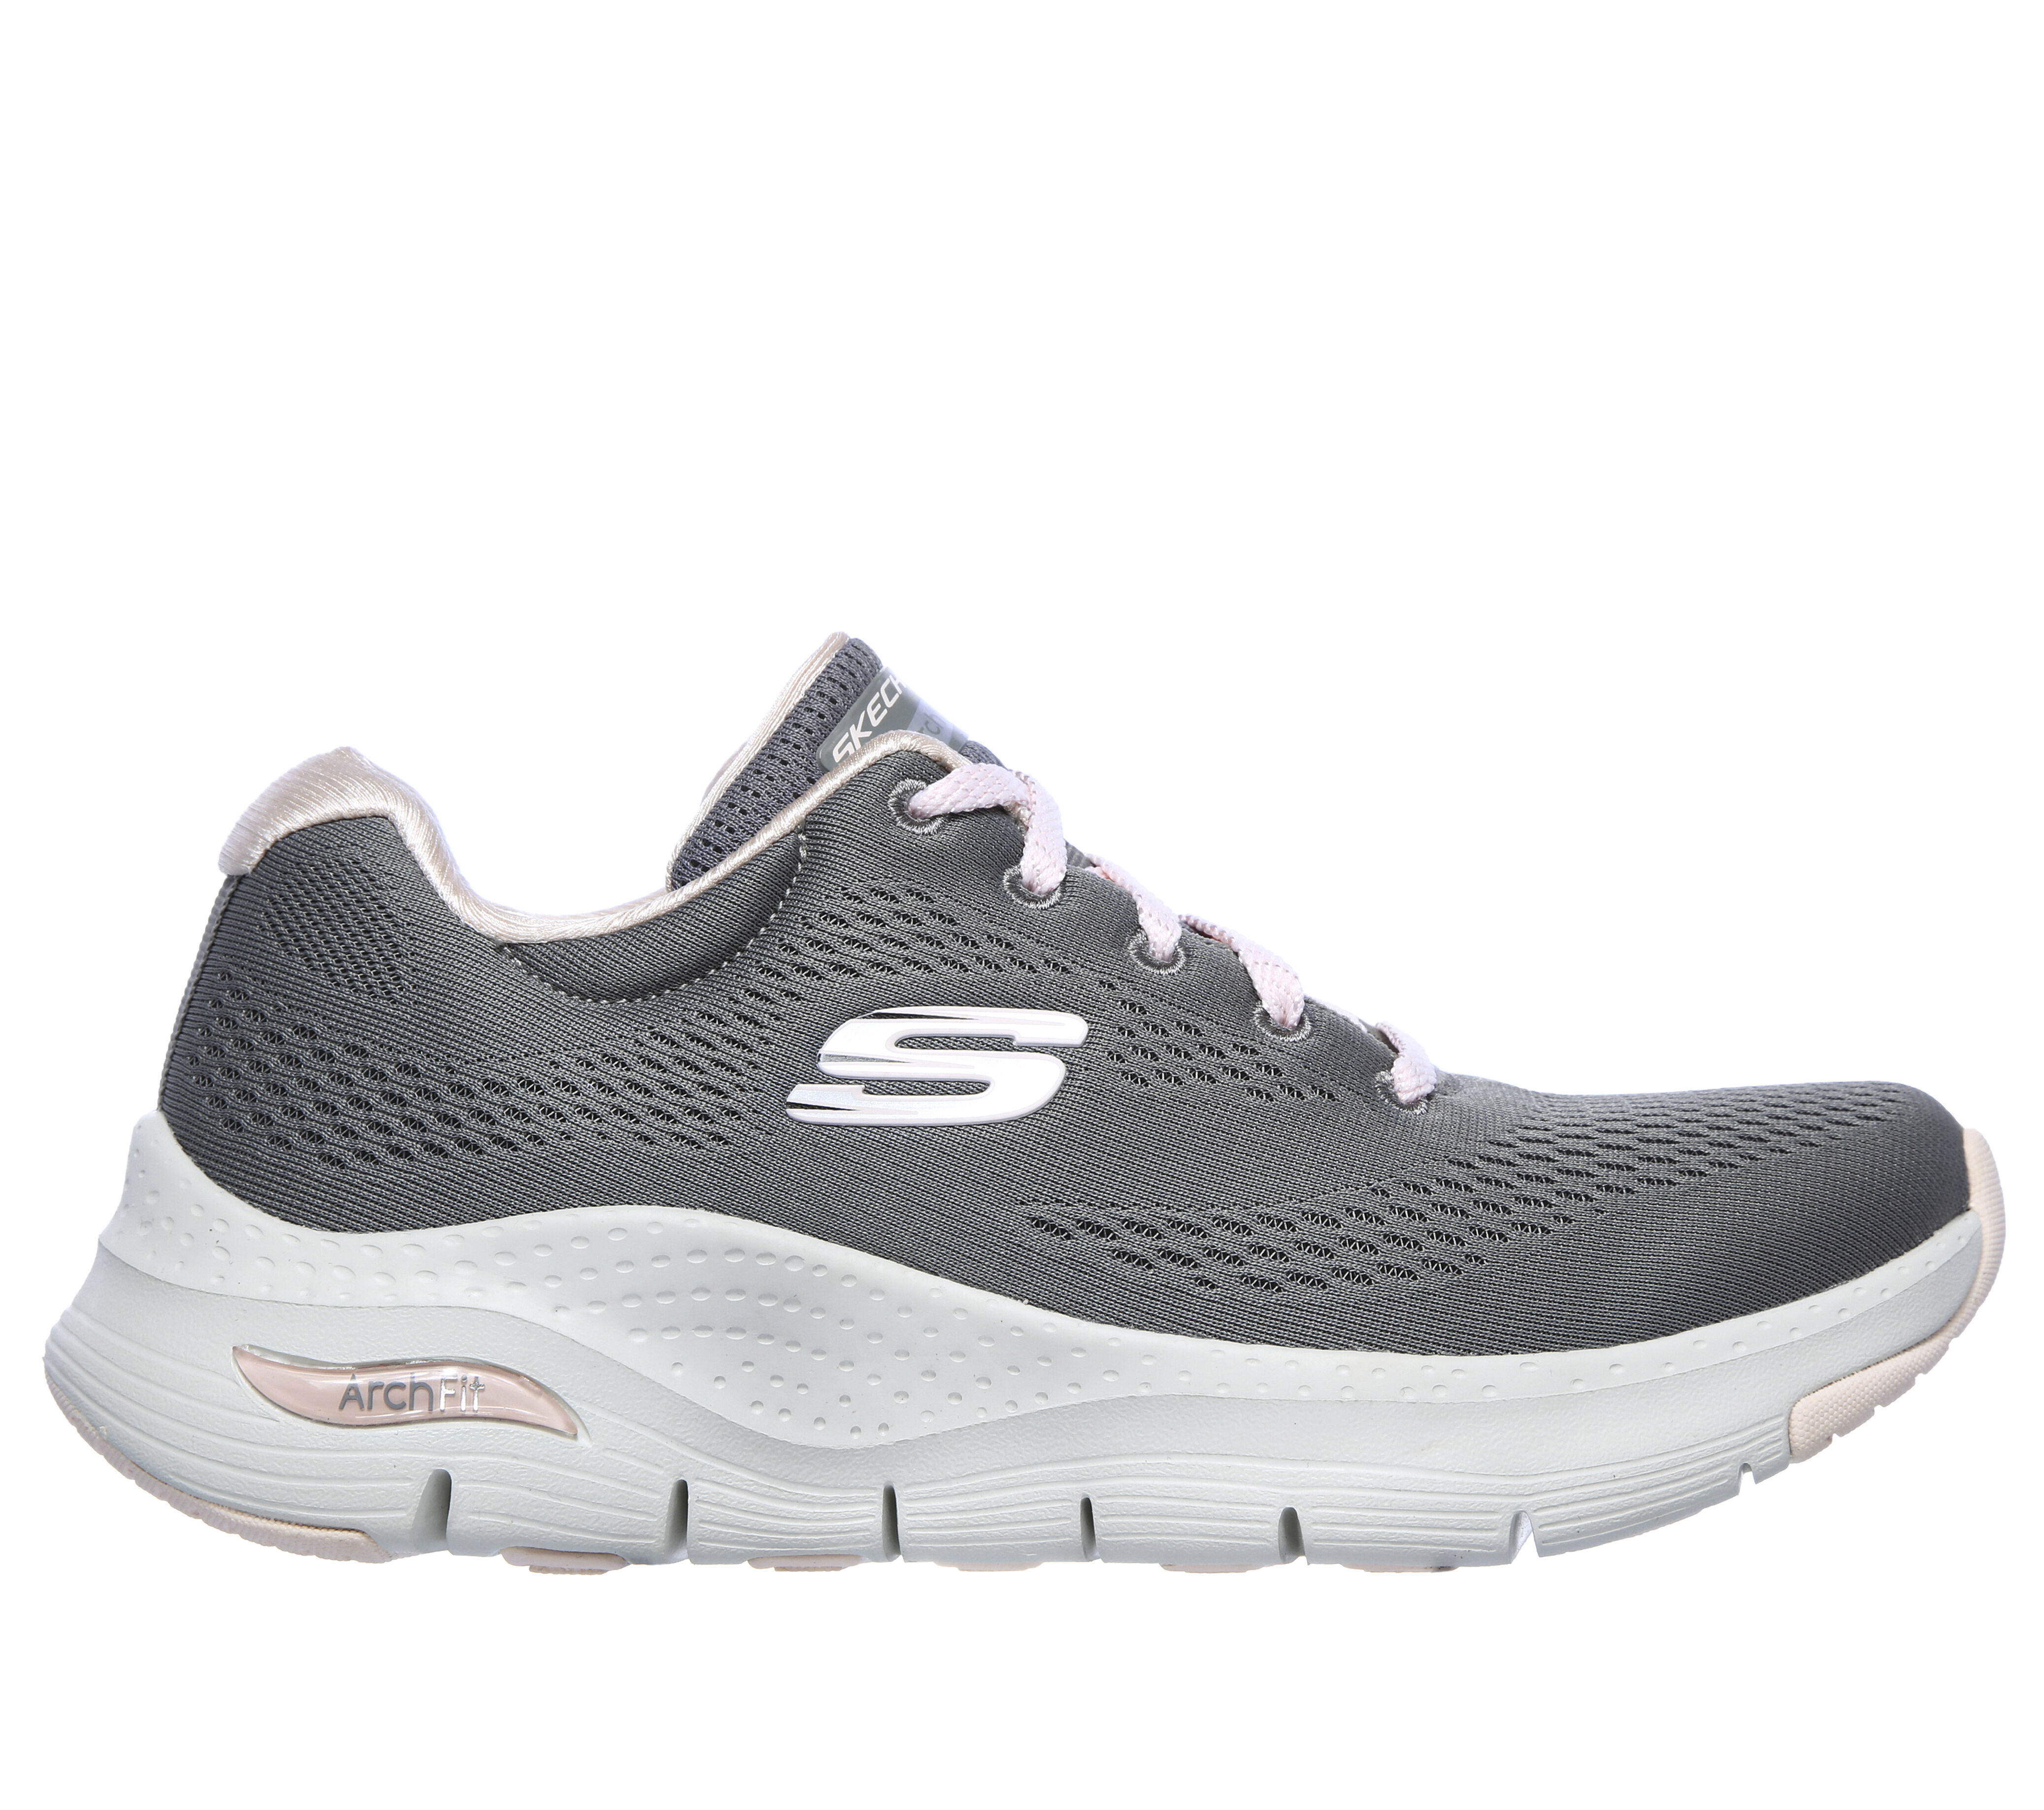 skechers wide fit shoes womens